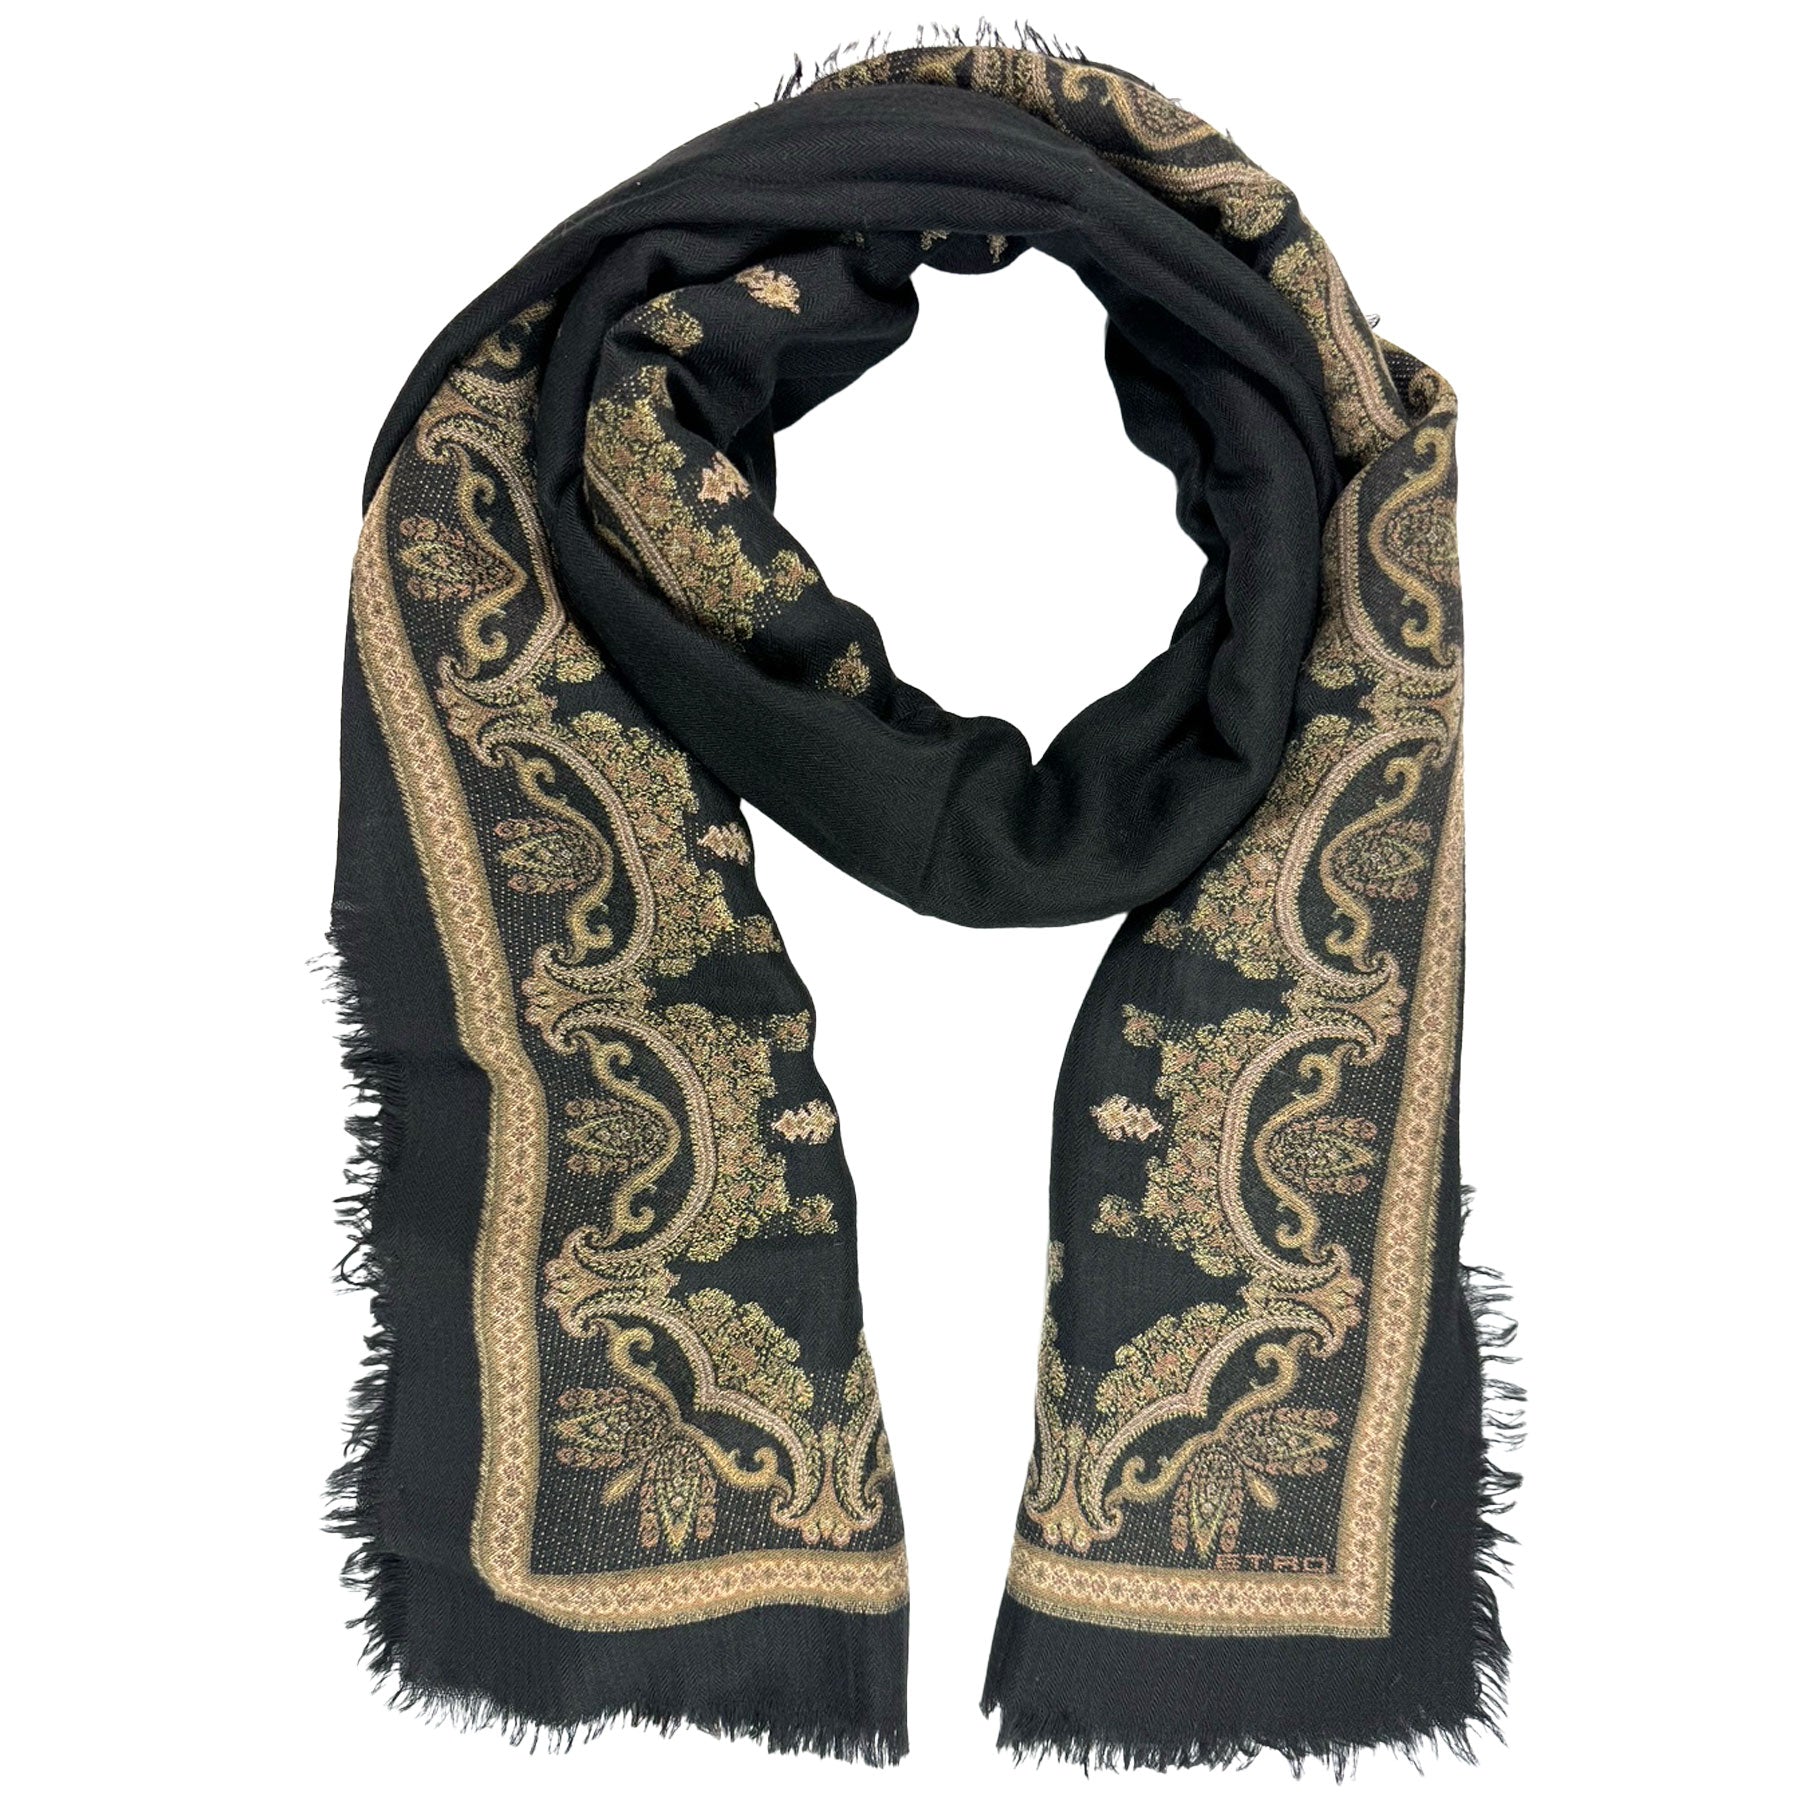 Etro Scarf Black Gold Baroque Design - Women Collection Extra Large Cashmere Shawl